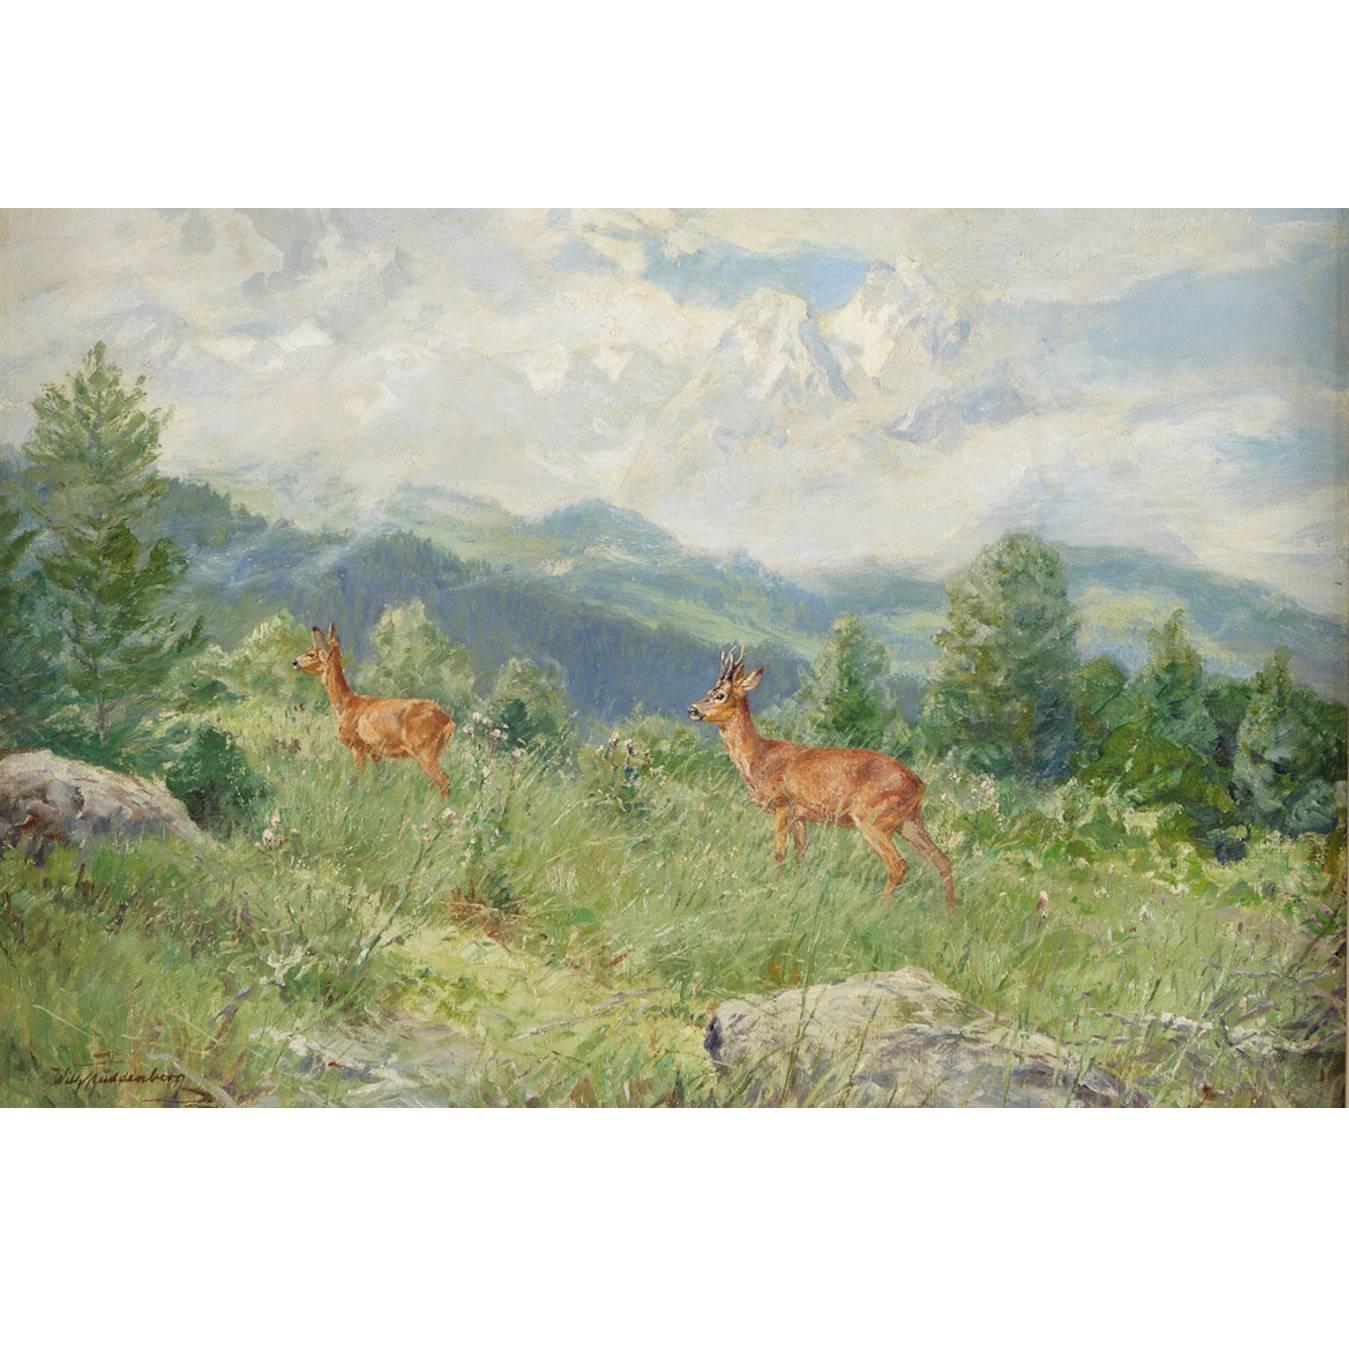 A beautiful and fine mountain landscape painting by German painter, Wilhelm Buddenberg (1890-1967) depicting two deer during a 